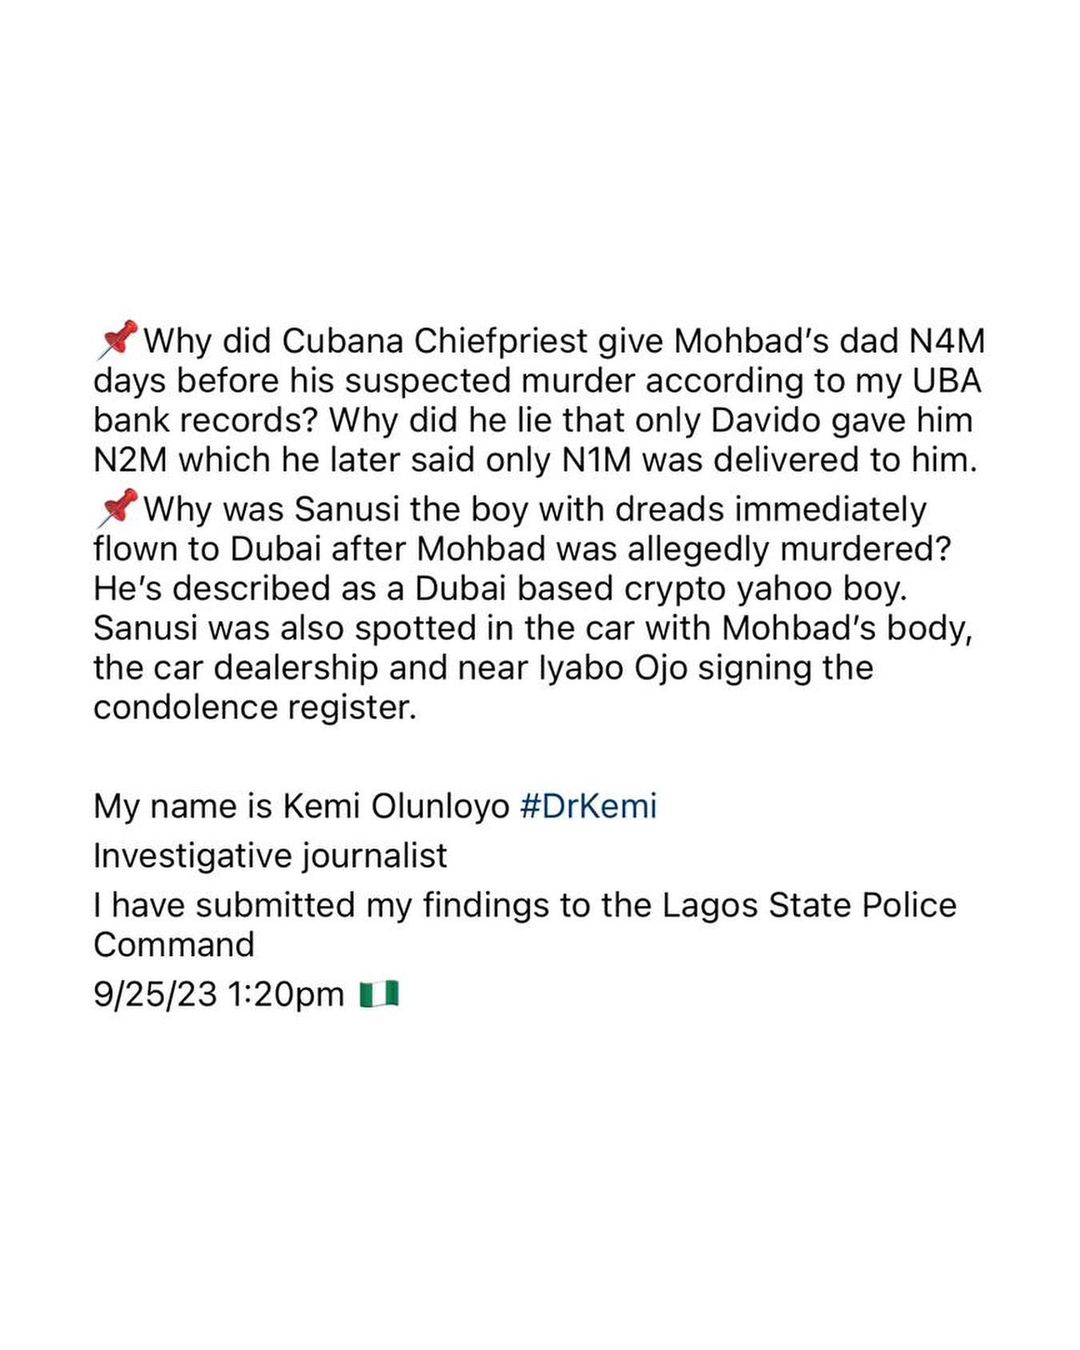 Kemi Olunloyo alleges Sam Larry fathered Mohbad’s son, Cubana Chief Priest mentioned